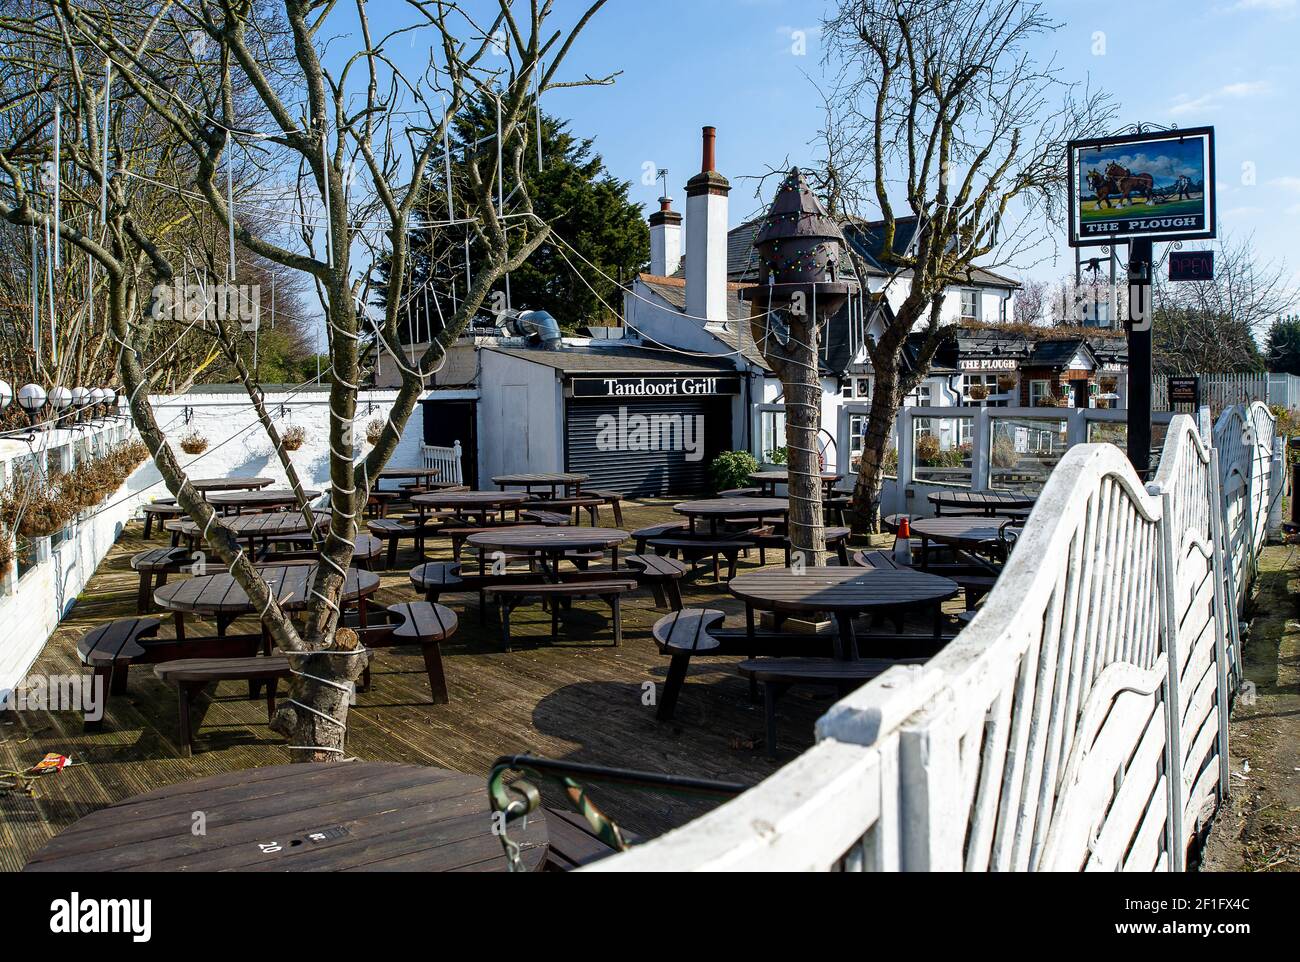 Sipson, West Drayton, UK. 7th March, 2021. The Plough pub in Sipson, West Drayton. Pub landlords are counting the days until they can reopen their pub gardens to customers again once the Covid-19 Coronavirus lockdown eases. Credit: Maureen McLean/Alamy Stock Photo